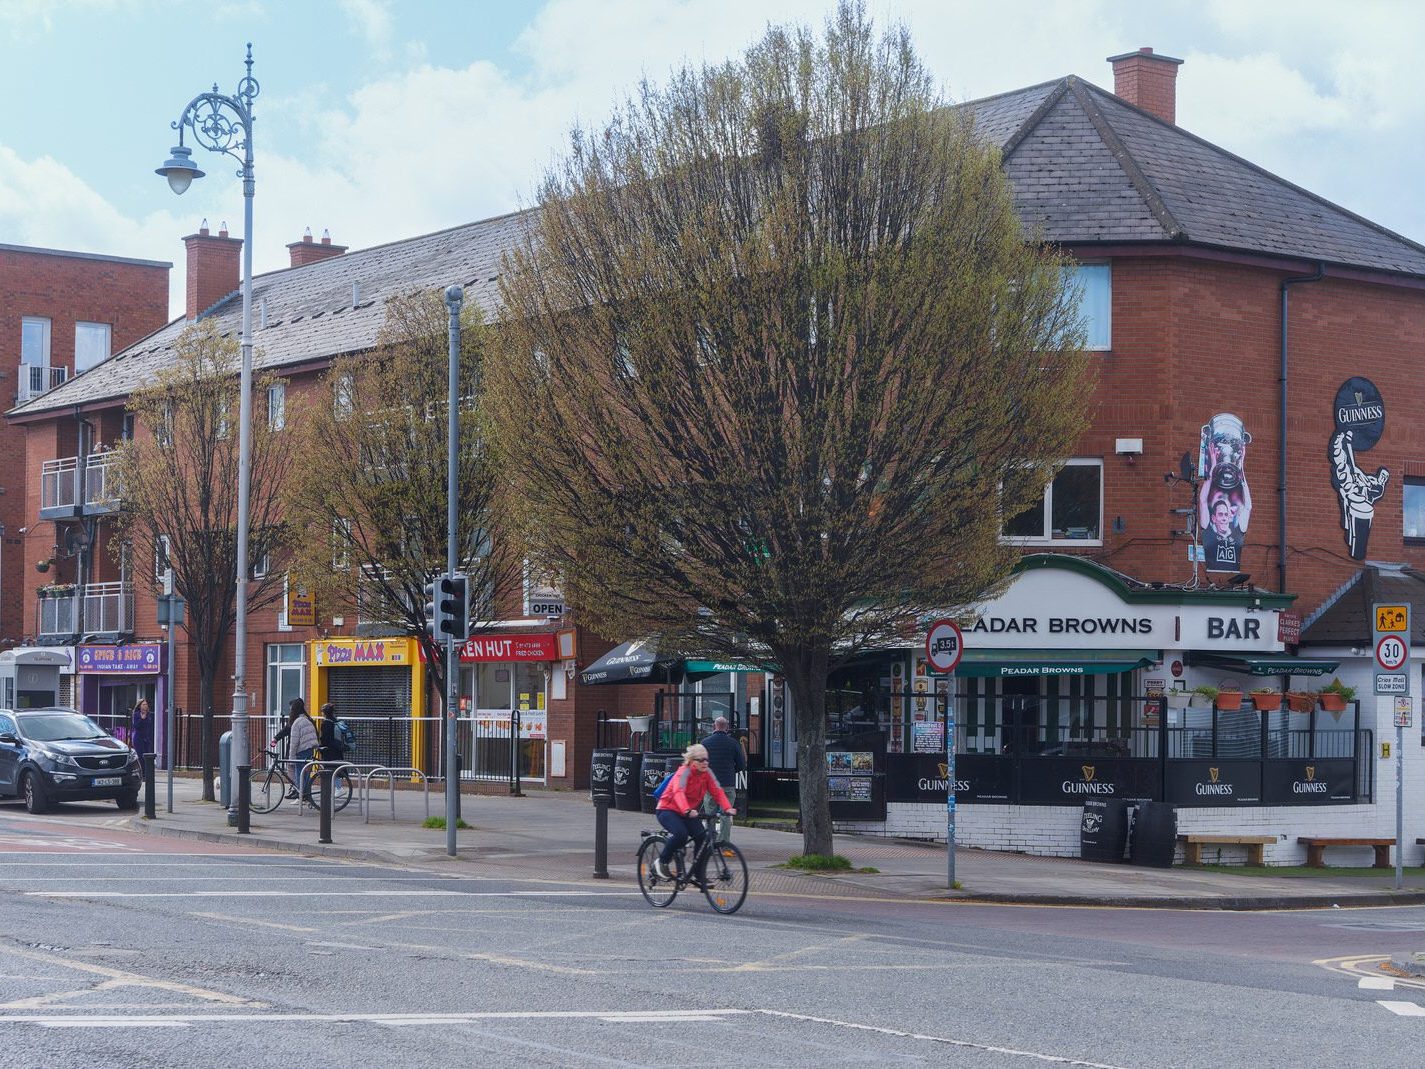 I WALKED ALONG NEW STREET SOUTH AND CLANBRASSIL STREET 018